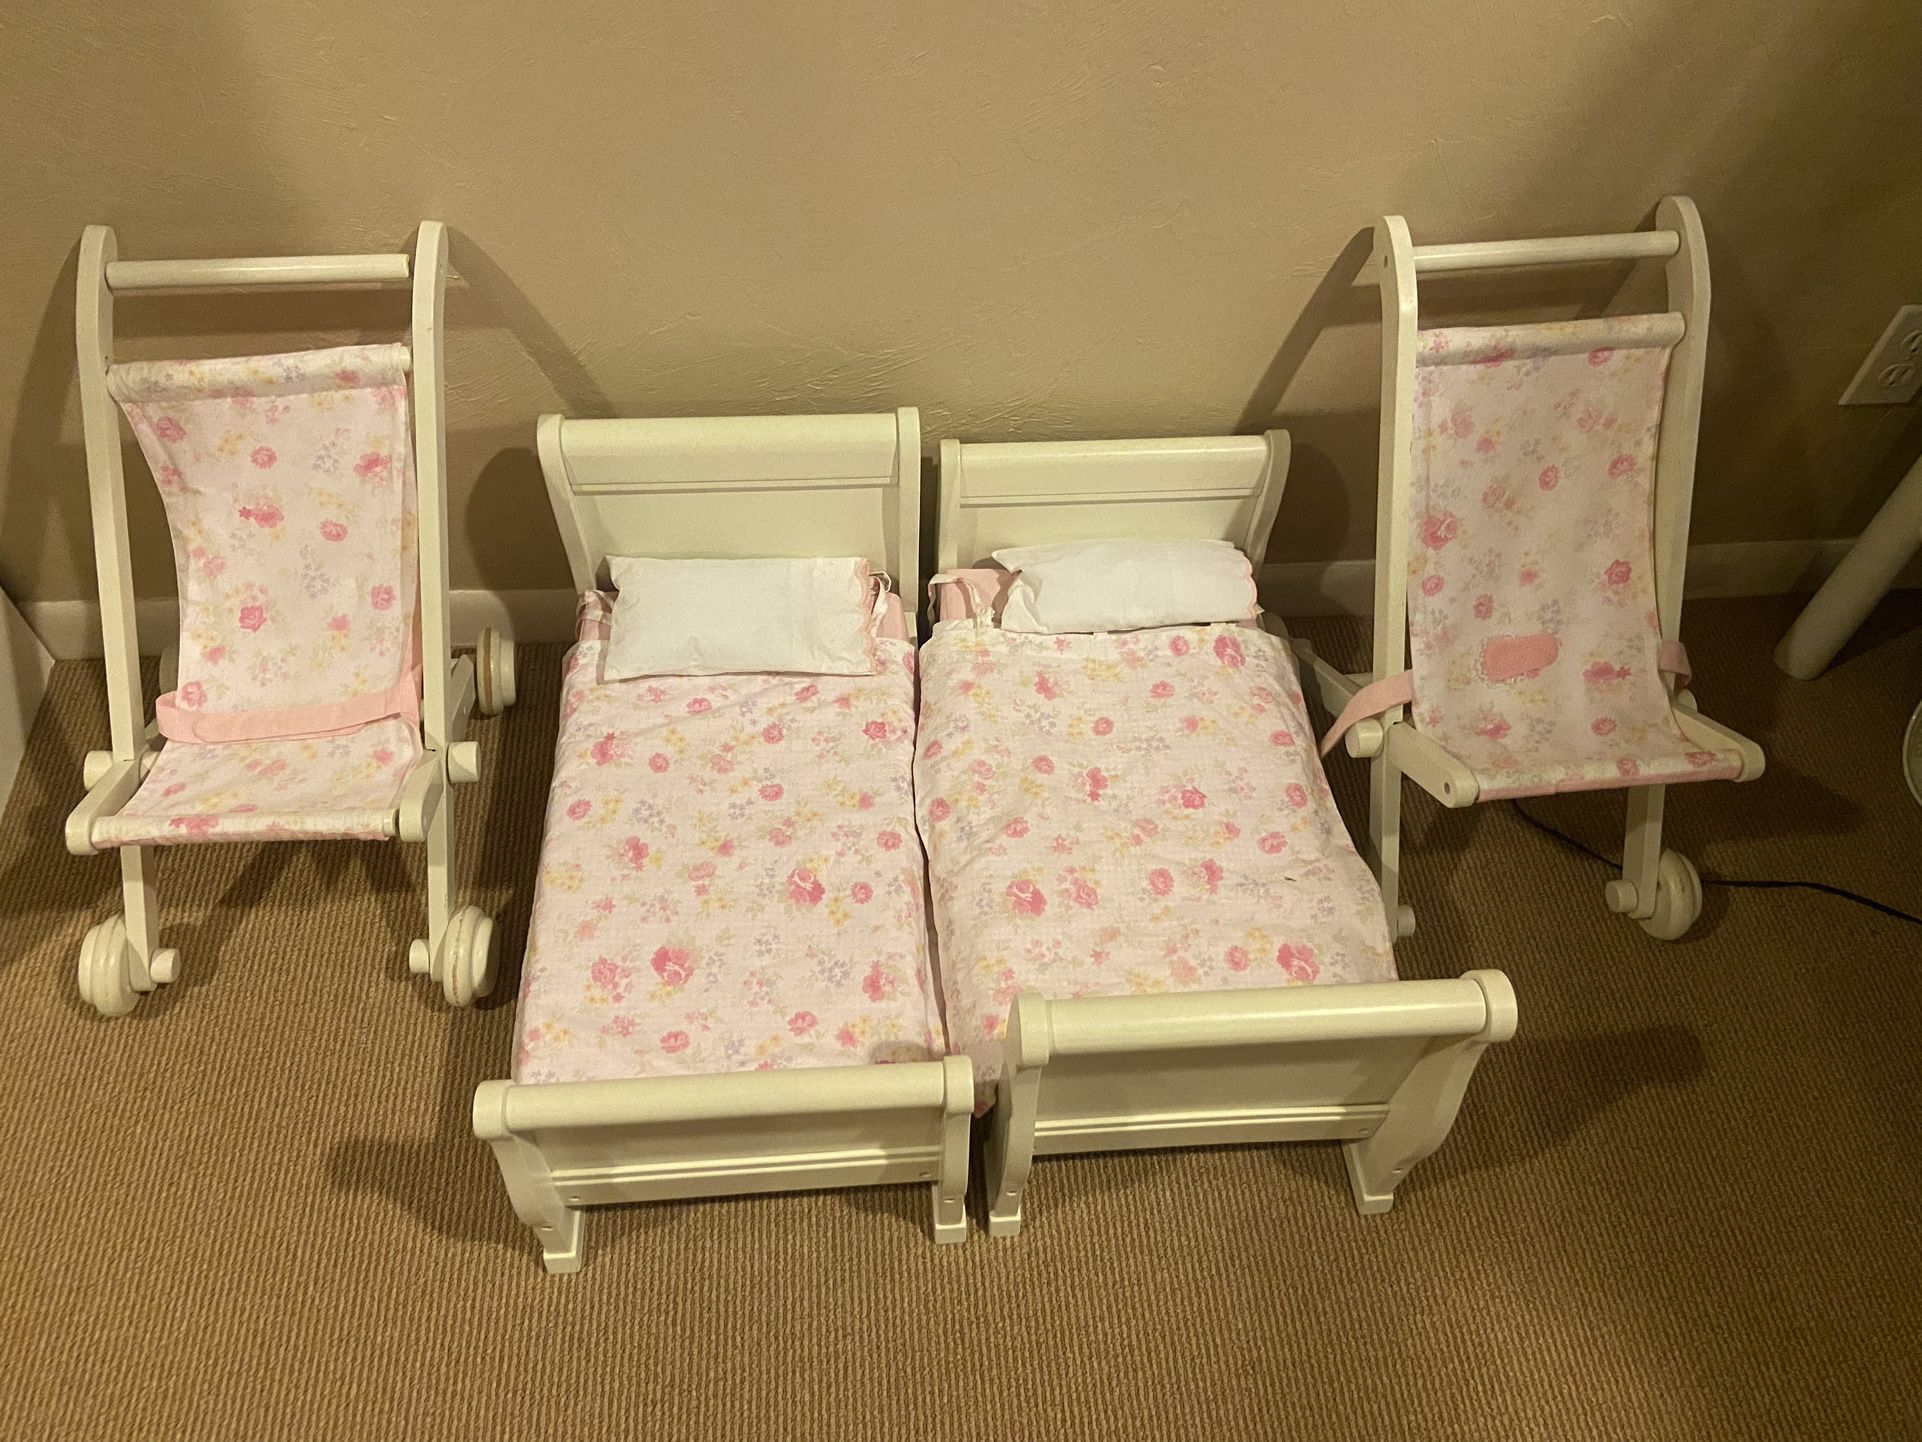 American Girl Doll Beds And Strollers